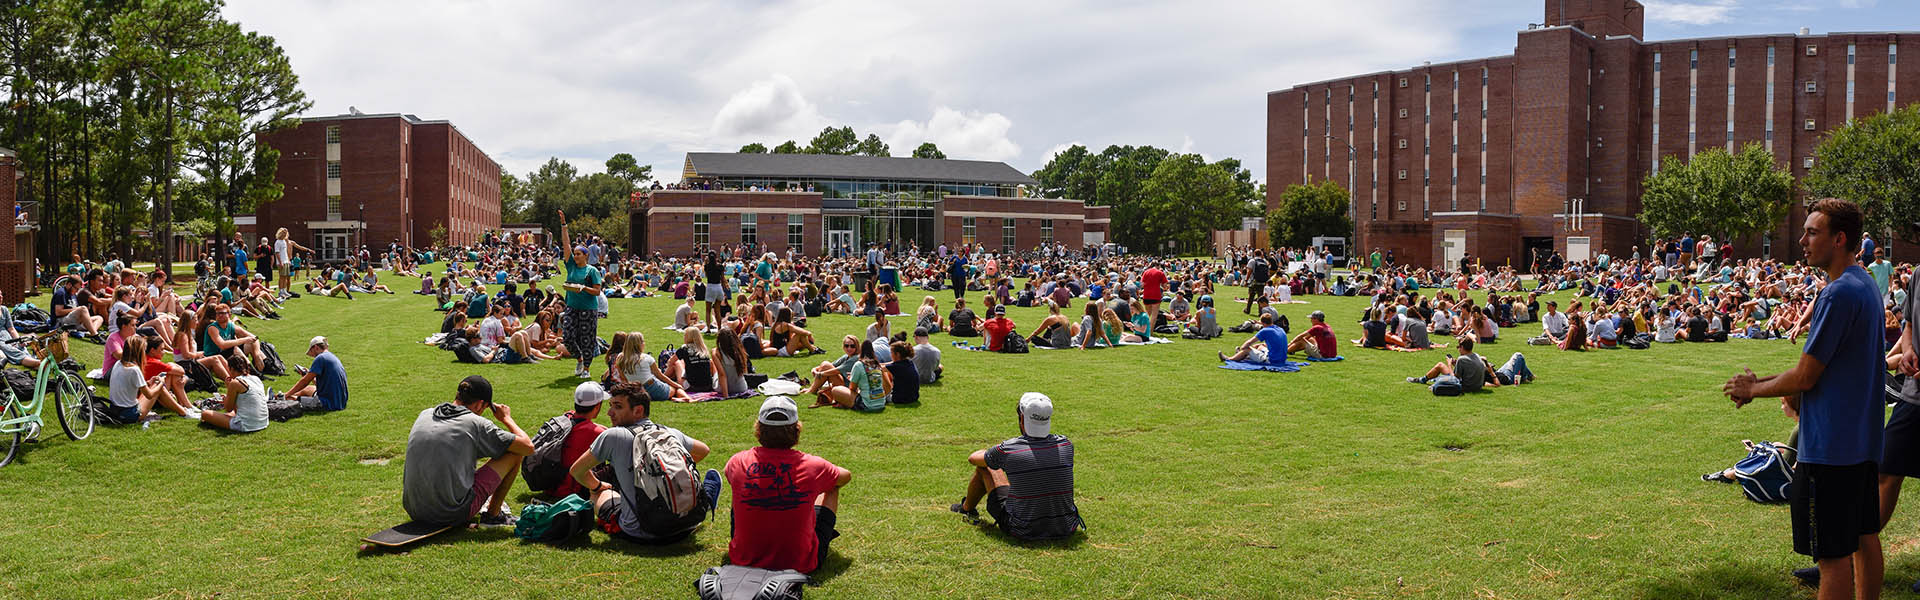 students sitting on a lawn